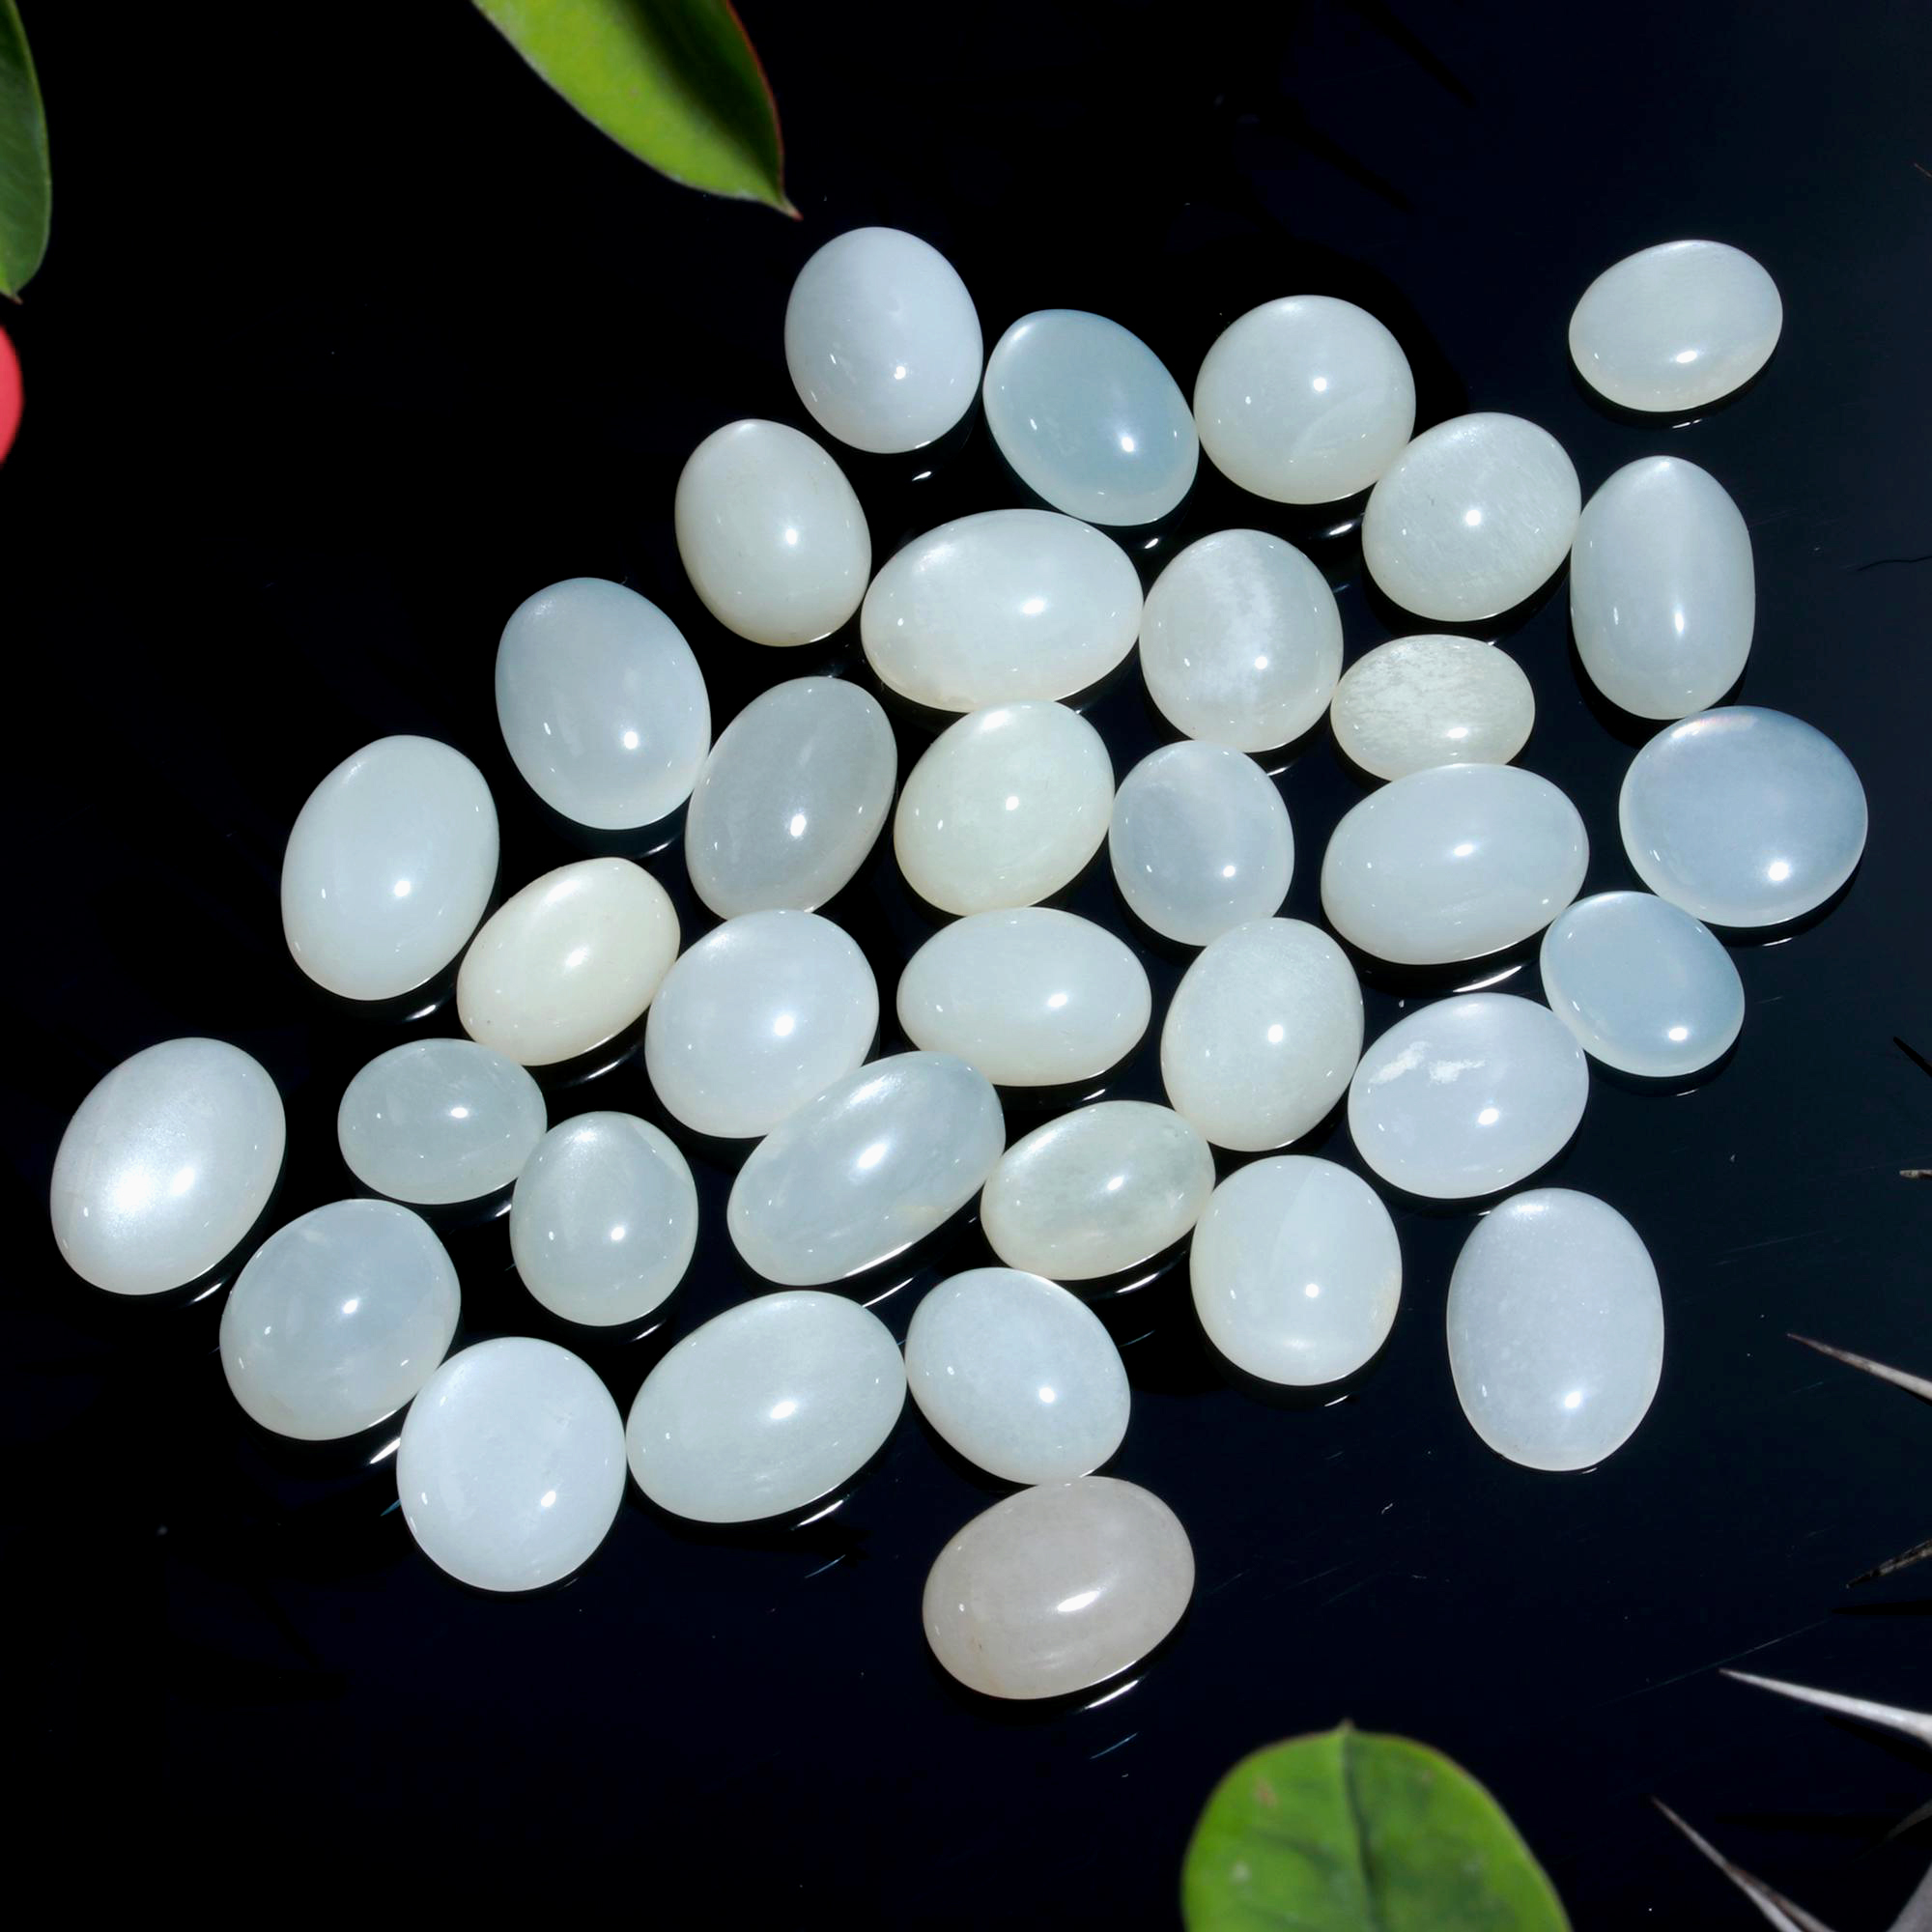 35 Pcs. 154Cts. Natural White Rainbow Moonstone polished Mix Cabochon Wholesale Loose Lot Size 15x9 10x7mm Gemstone for jewelry